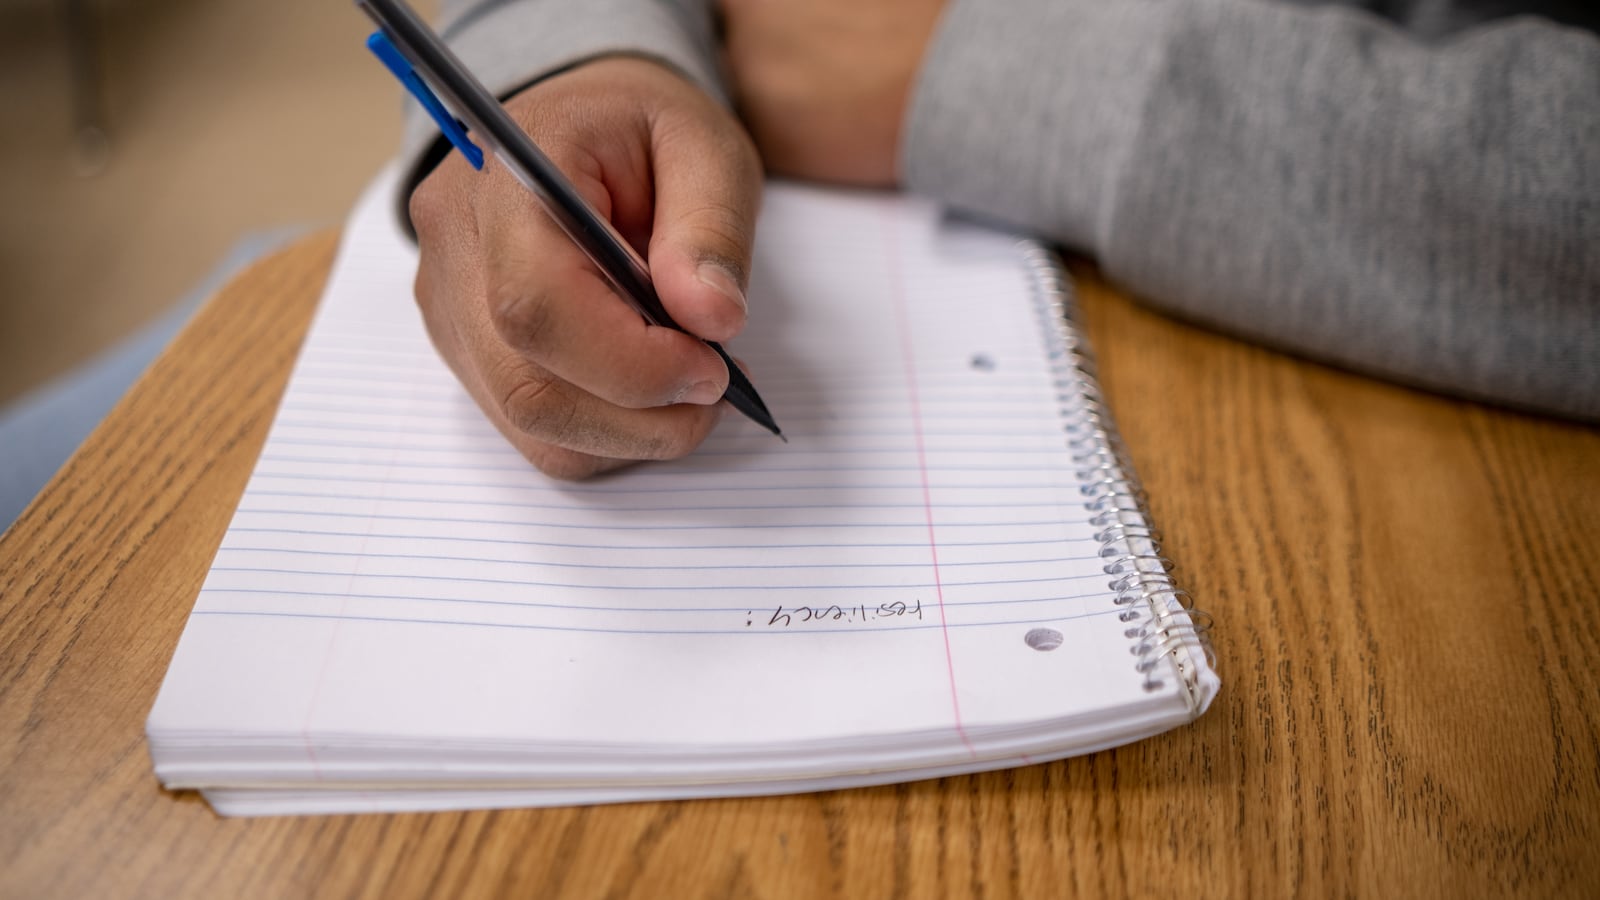 A young man writes in his notebook, using a mechanical pencil with a blue clip near the eraser.